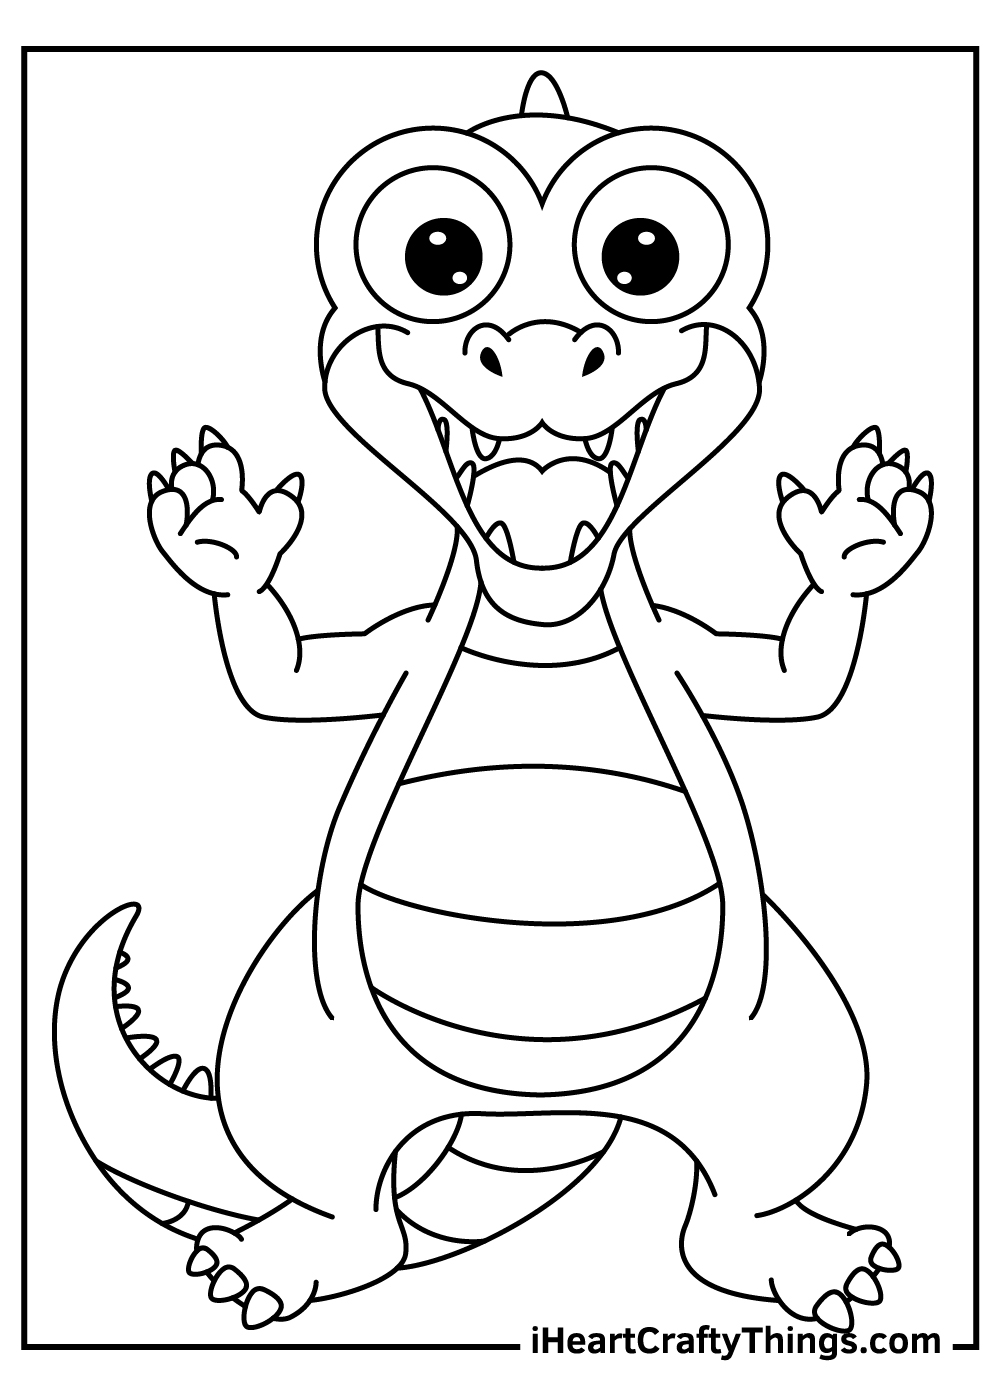 Printable Alligators Coloring Pages Updated 2021